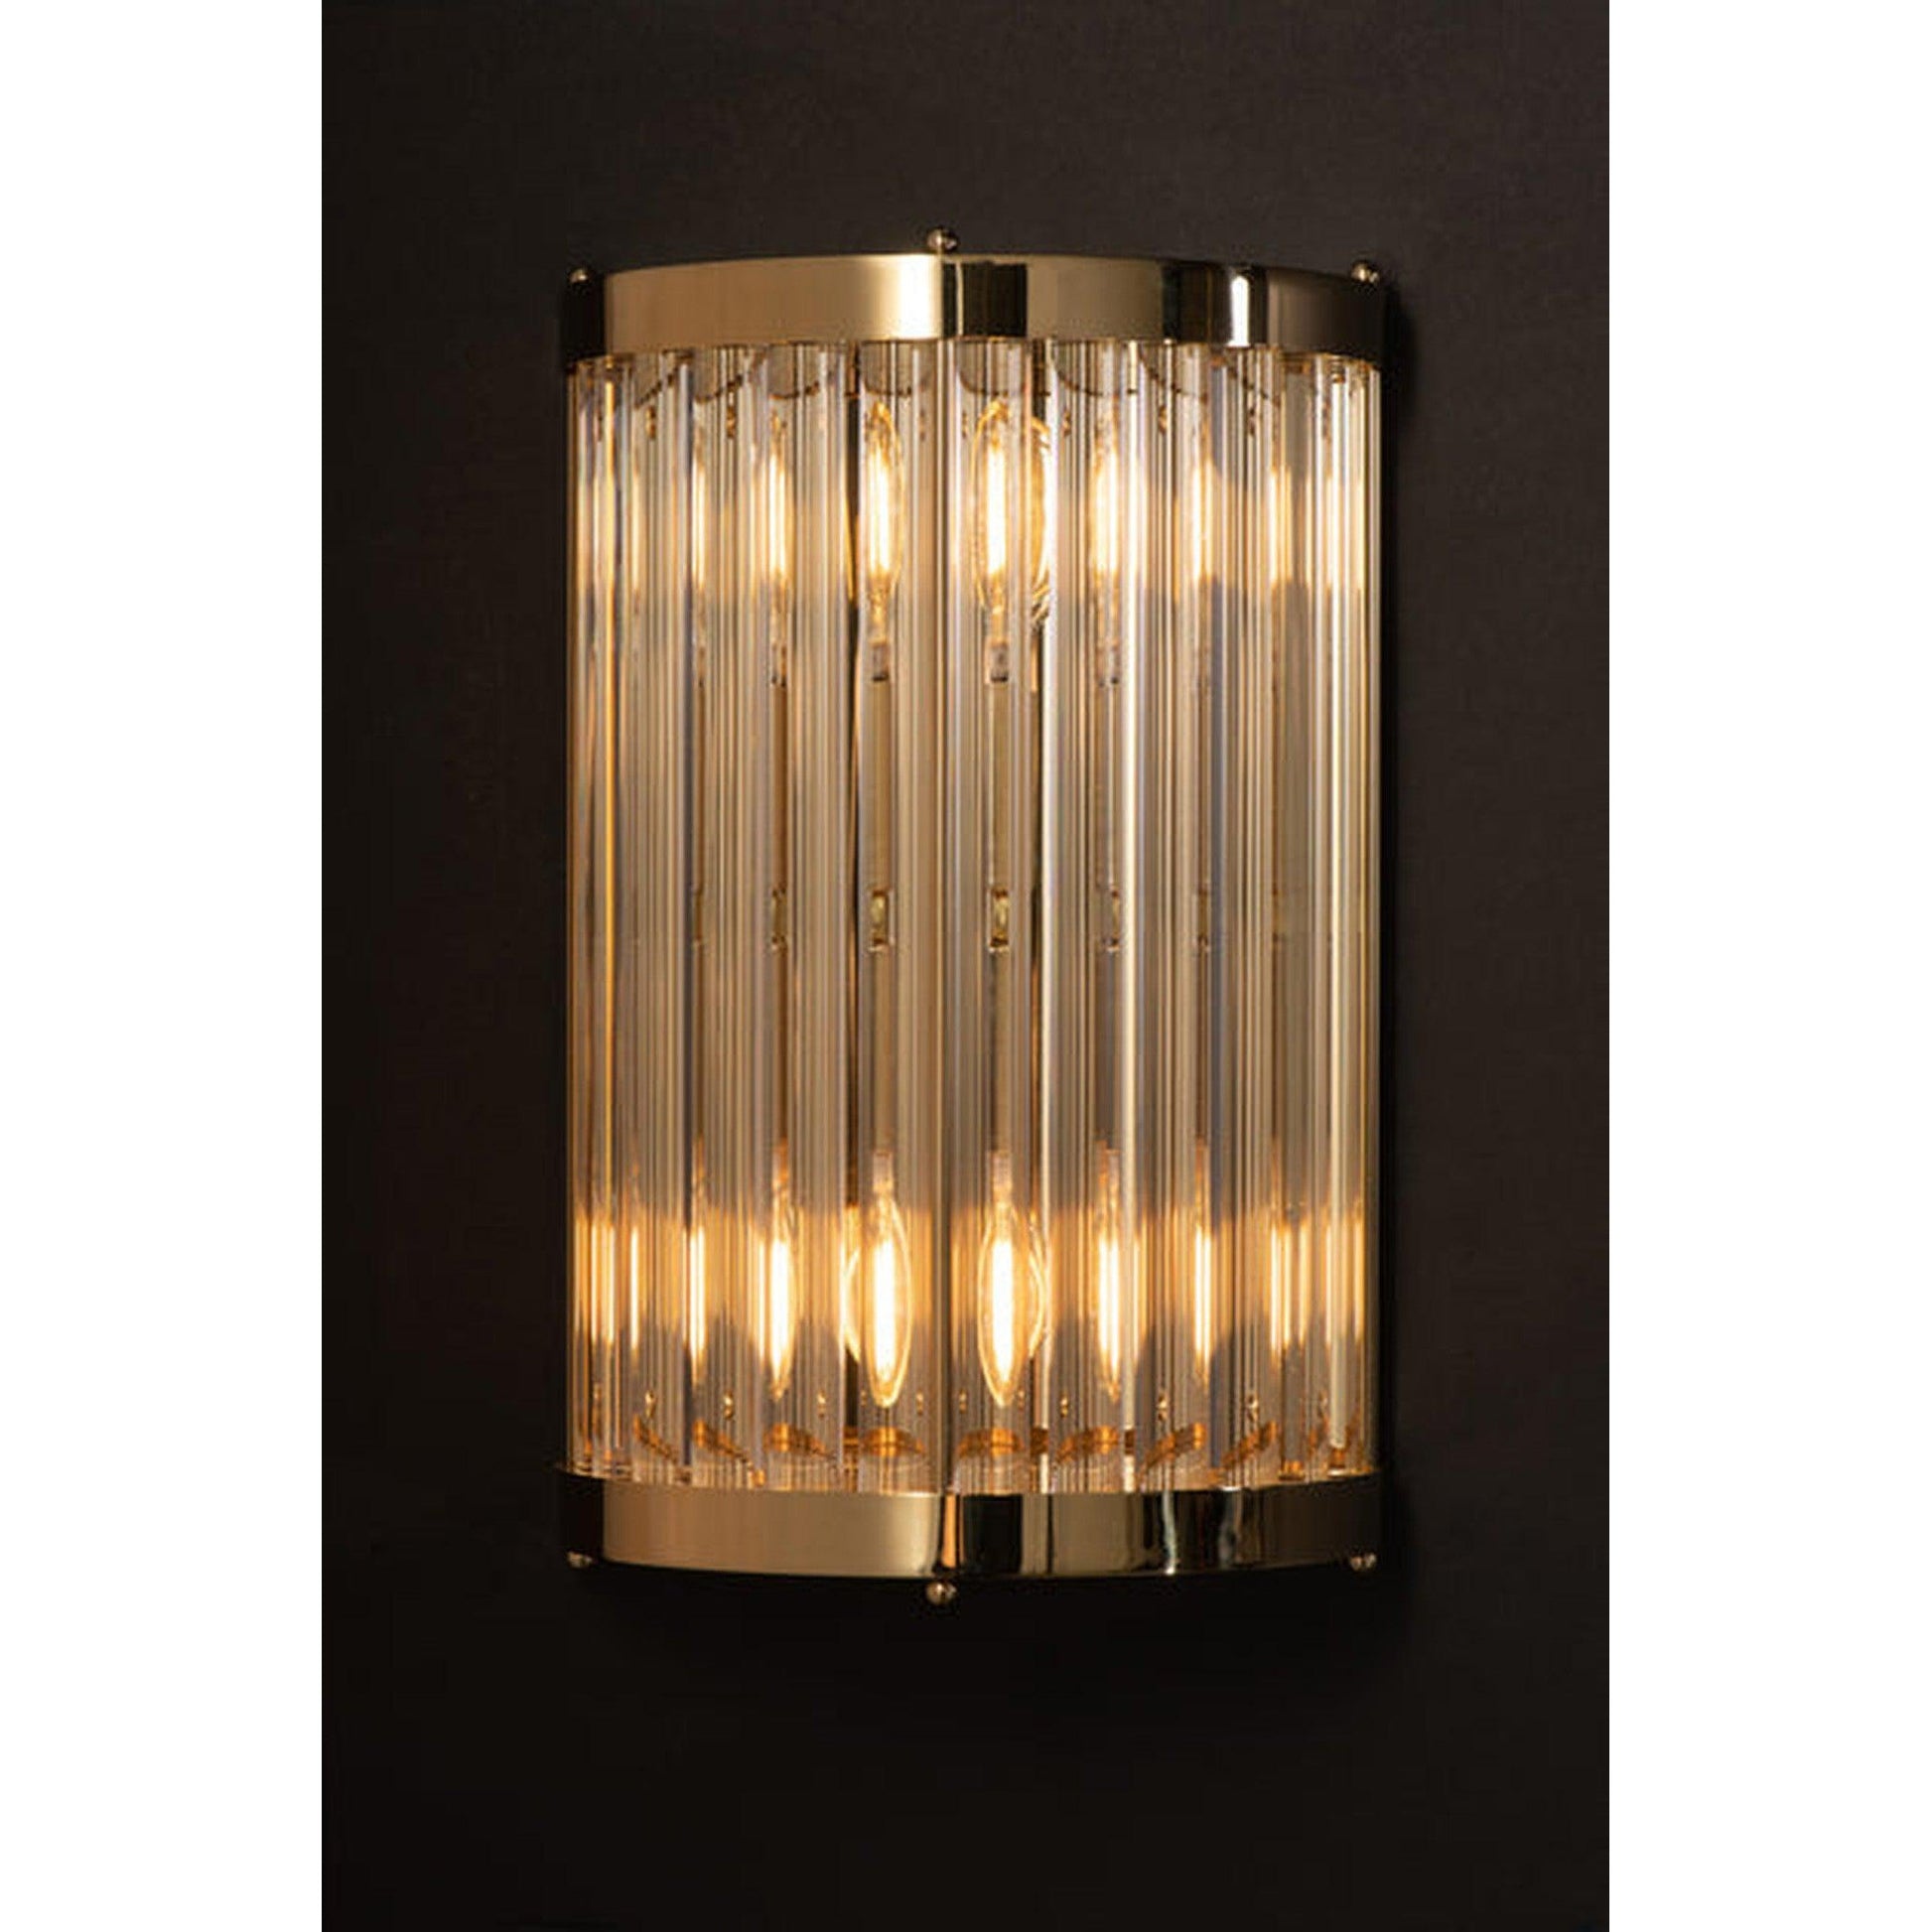 The Vault Bacchus Wall Sconce